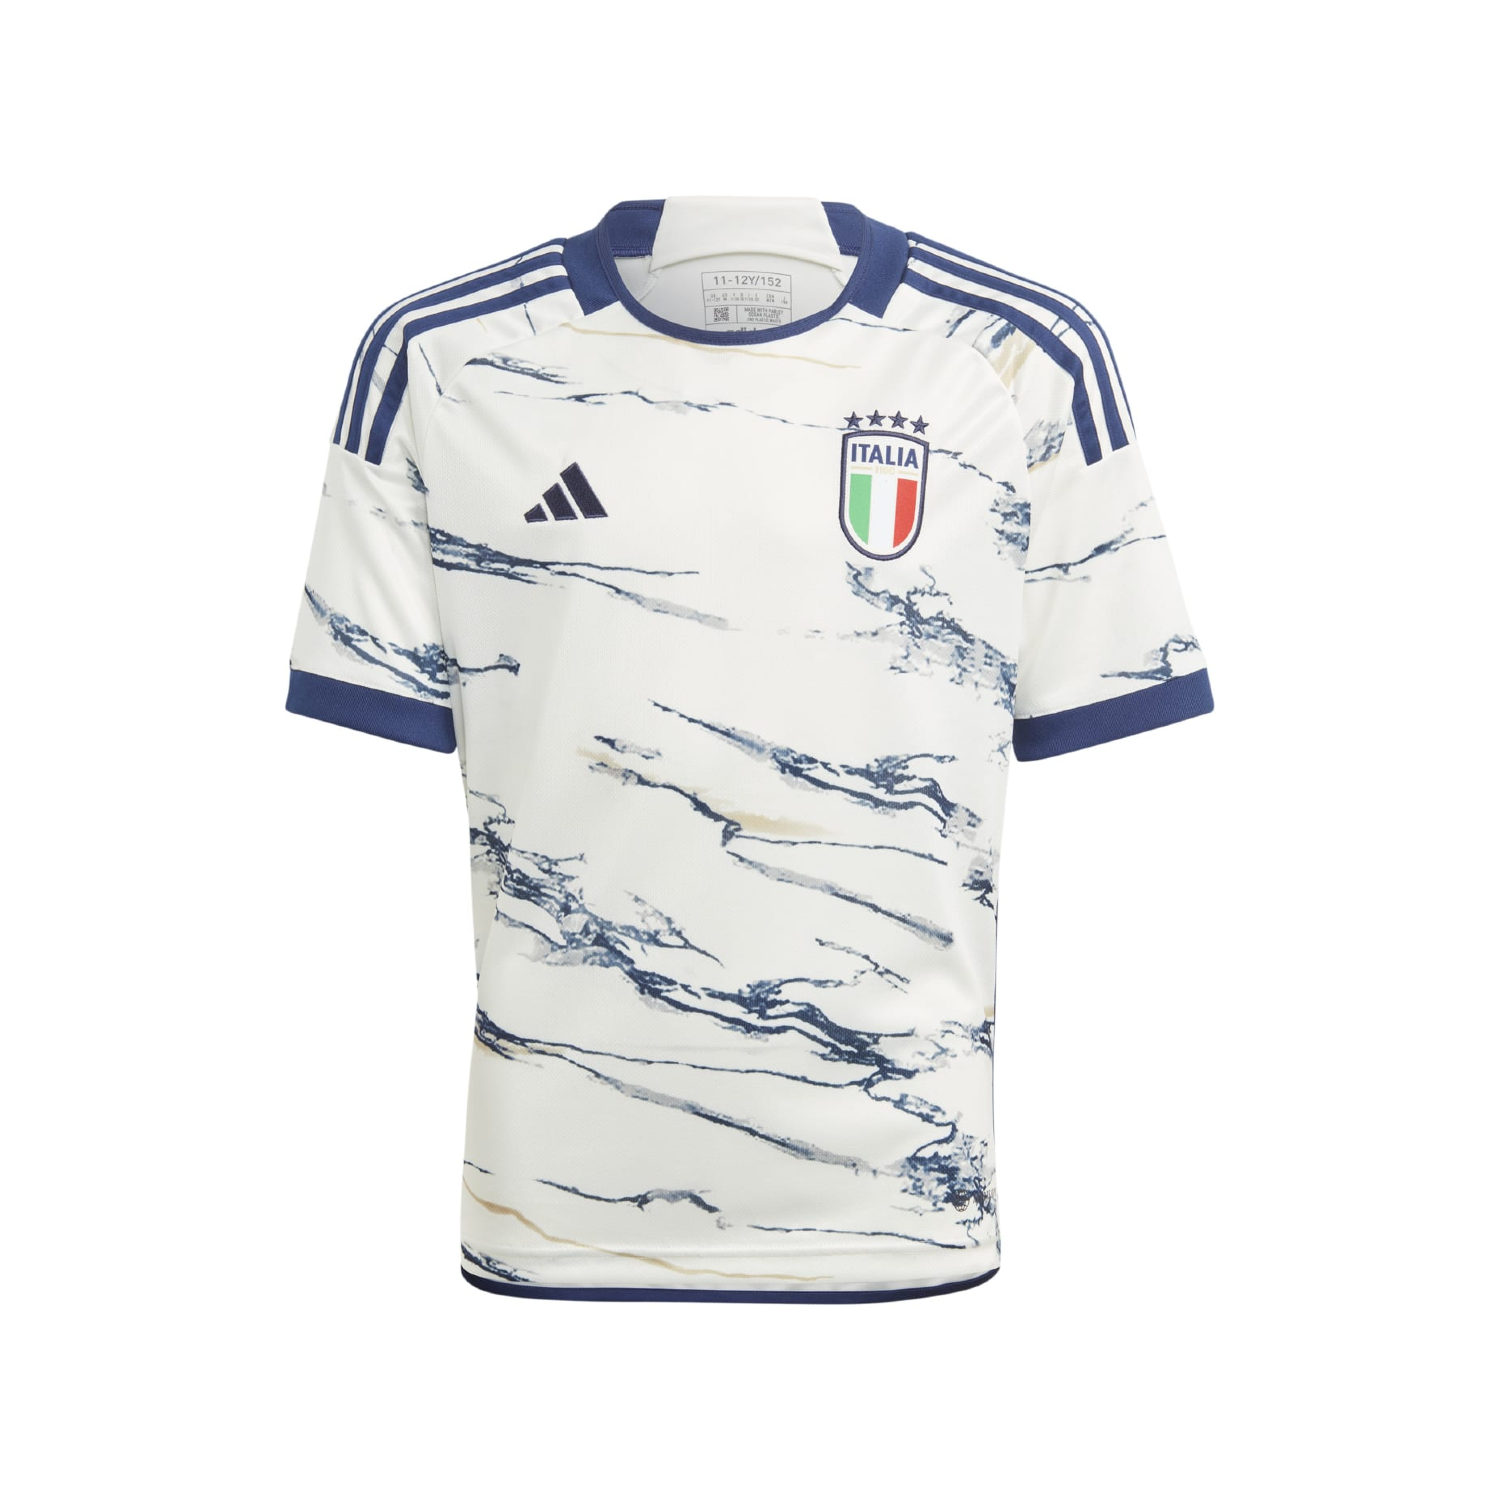 rijk gordijn horizon Official FIFA Store - The Home of Official World Cup Shirts & Clothing